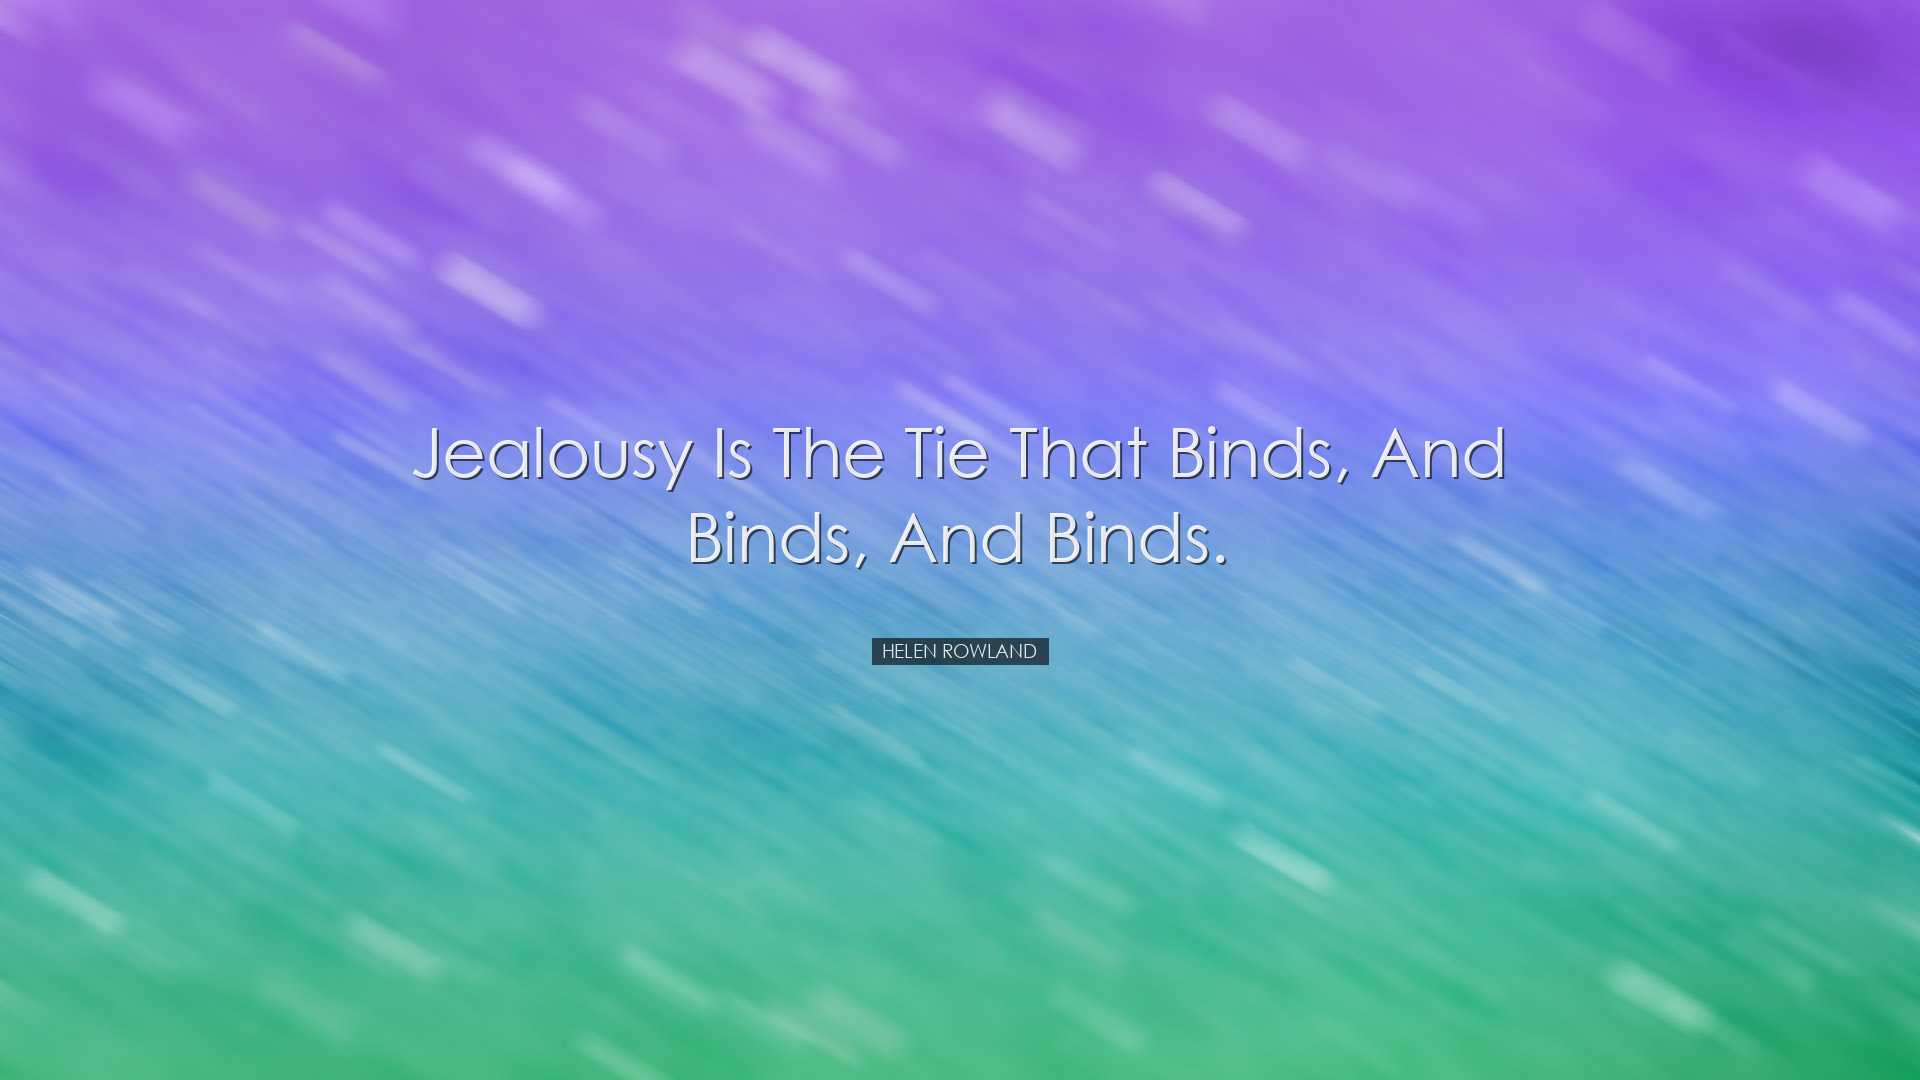 Jealousy is the tie that binds, and binds, and binds. - Helen Rowl